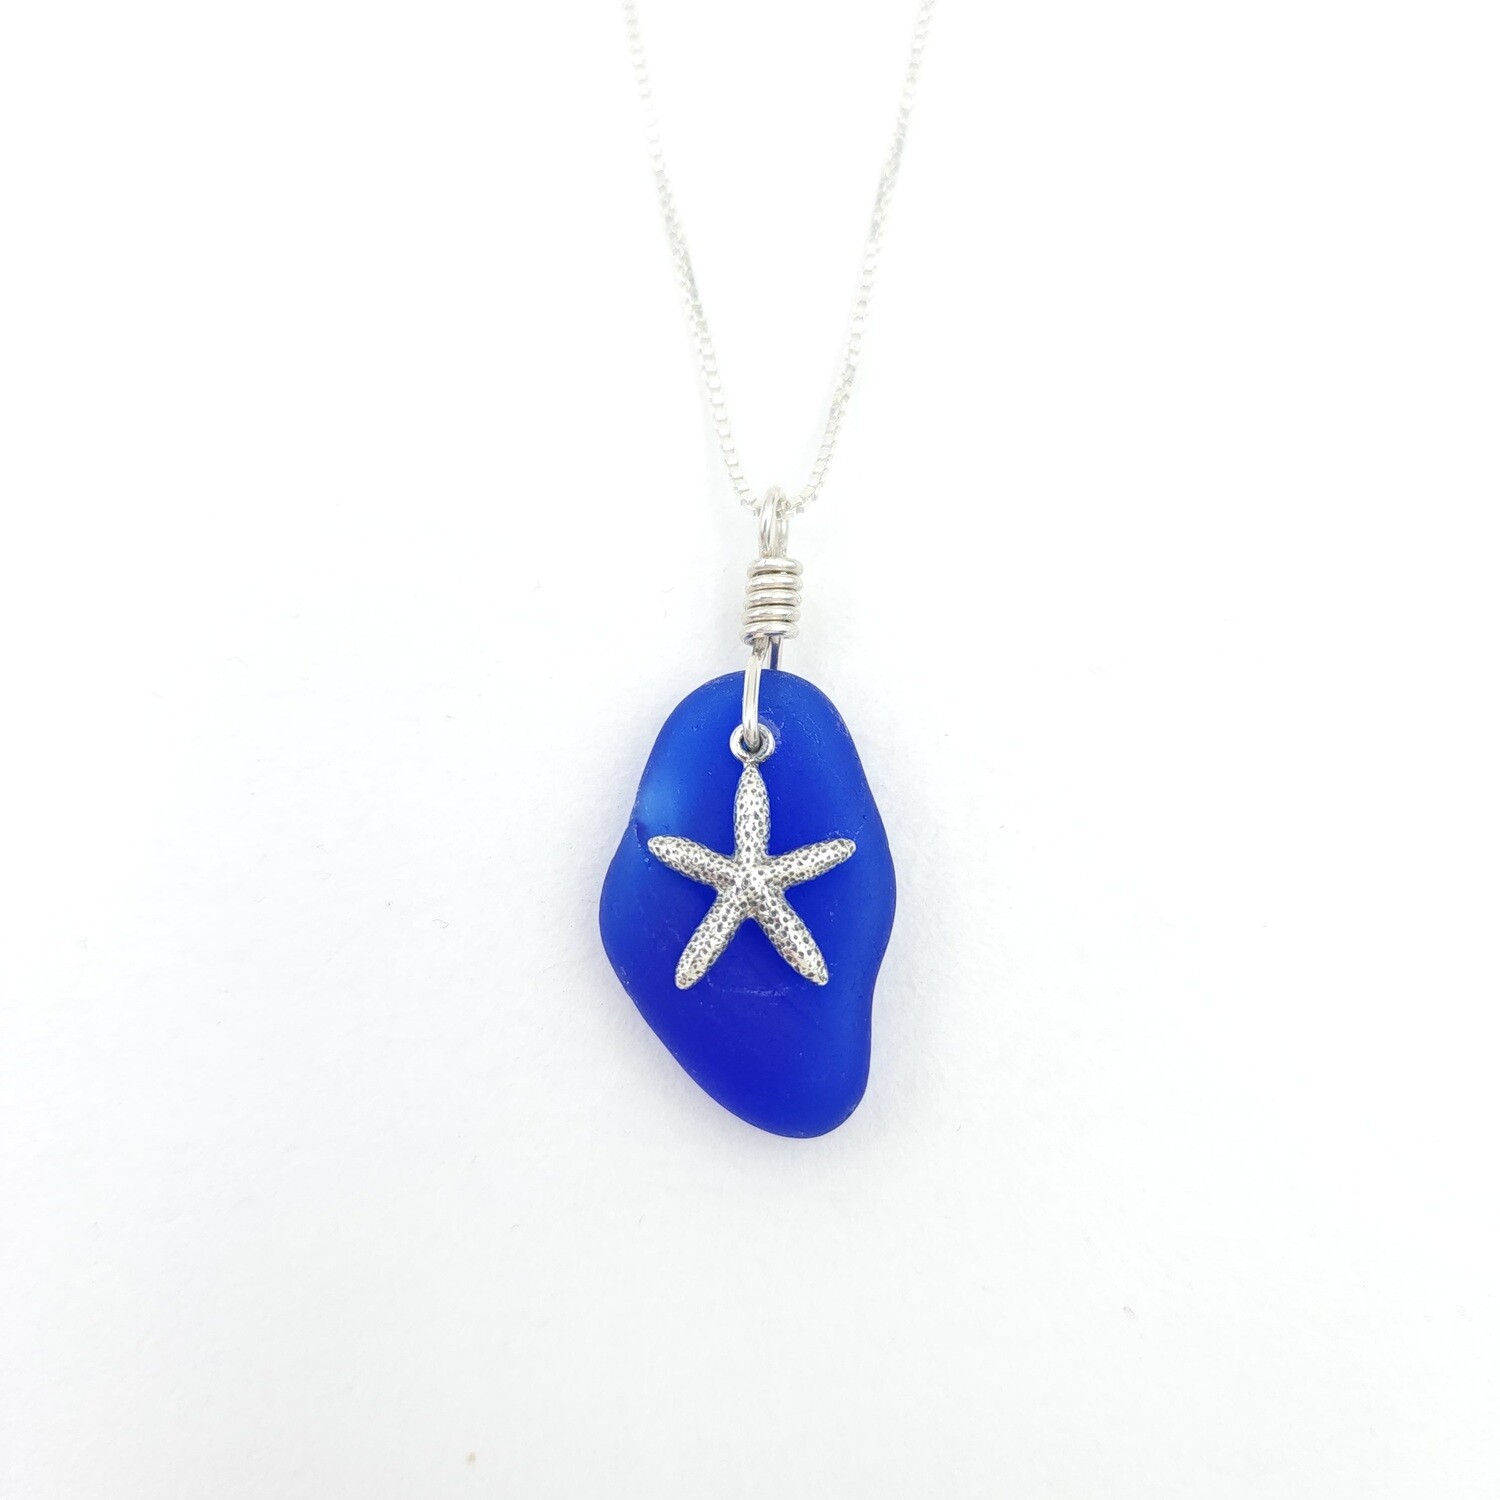 Cobalt Blue Lake Erie Beach Tile and Starfish Charm Necklace